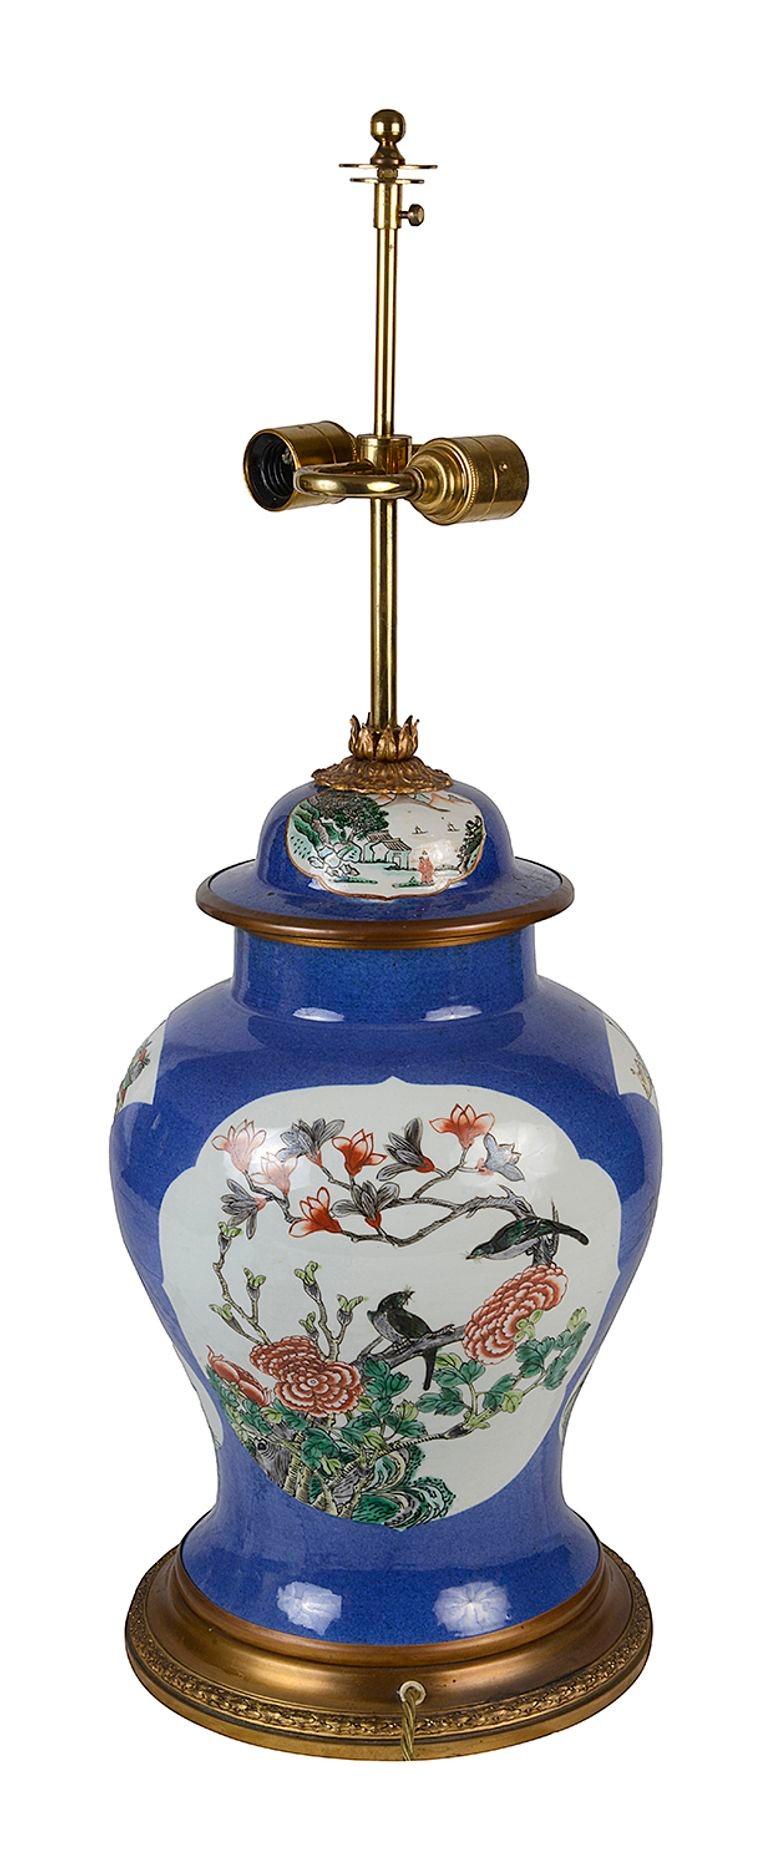 A striking 19th Century Chinese export Famille Verte porcelain vase / lamp, having a blue ground with inset hand painted panels depicting exotic birds and flowers, mounted on a gilded ormolu base.


Batch 76 N/H